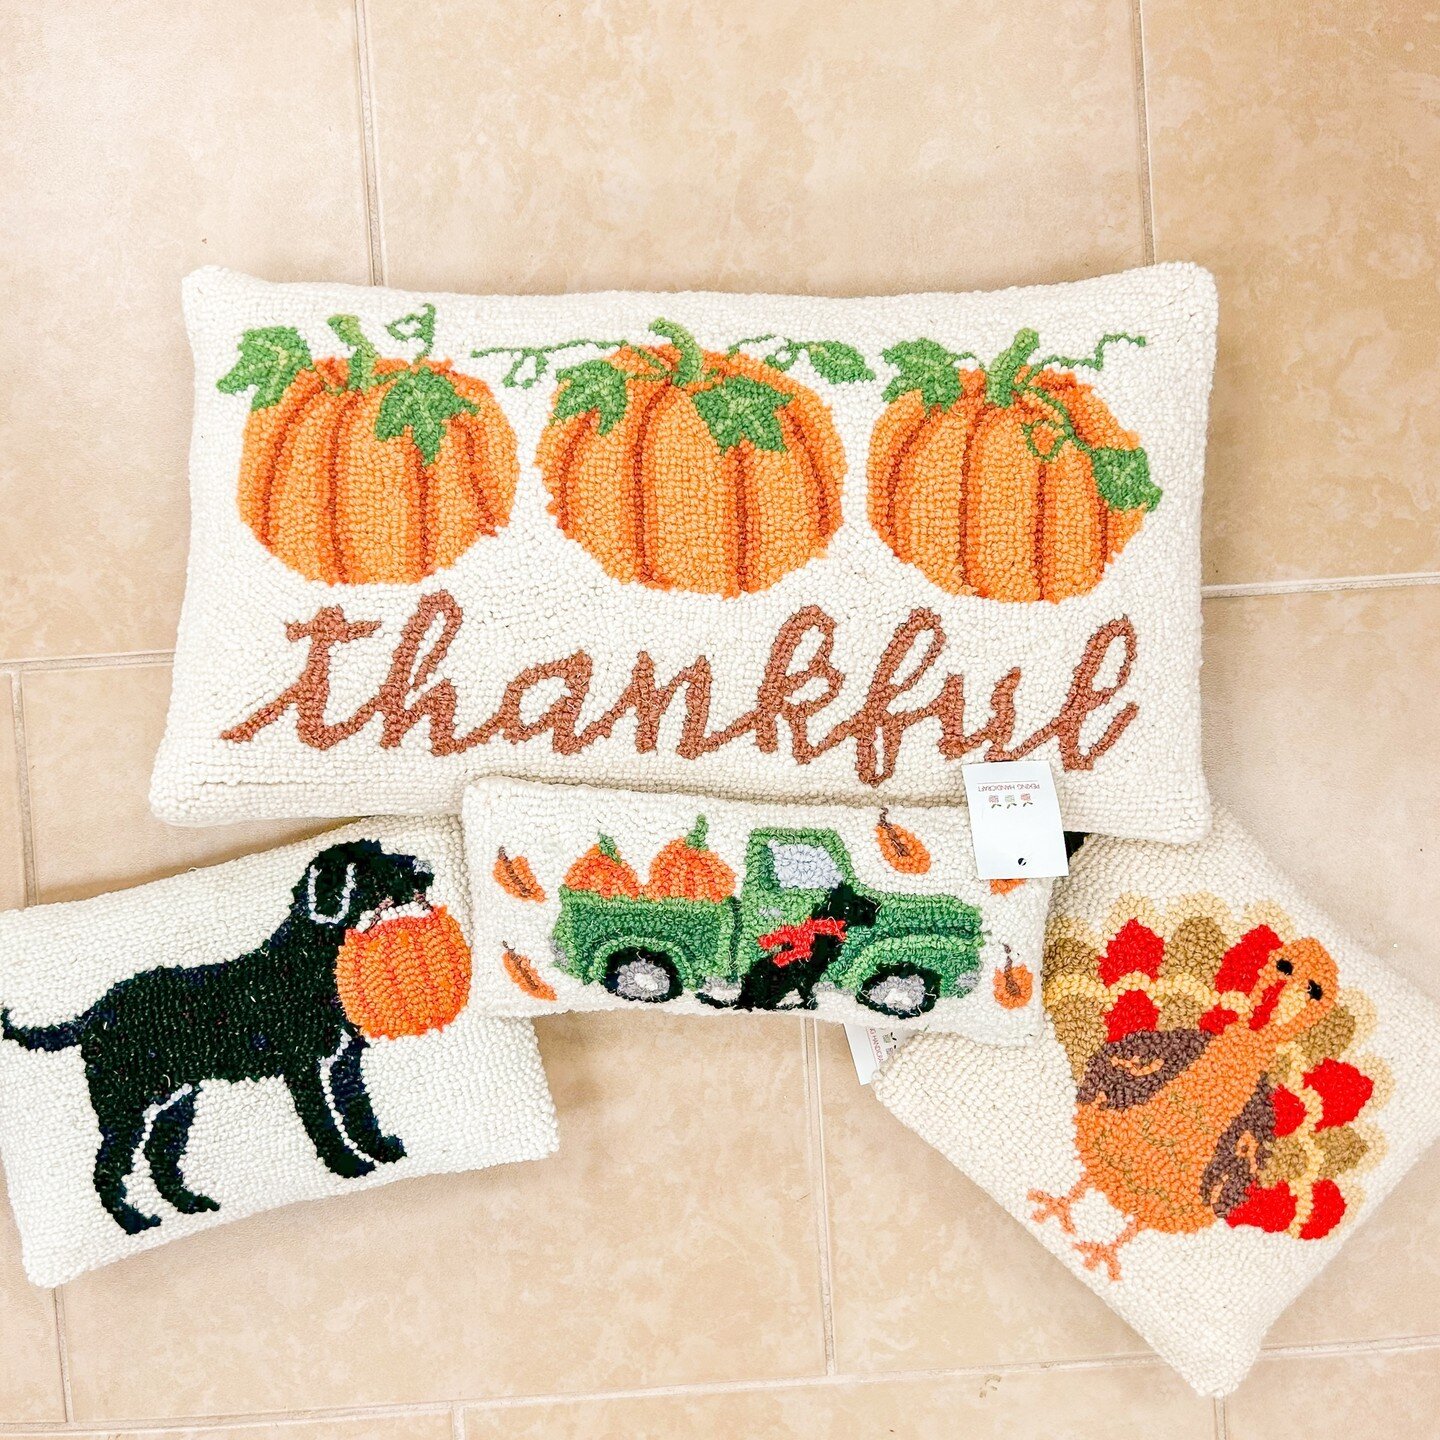 We are thankful for so much this year. Be sure to grab your hostess gifts or last minute decor in store today. We will be closed tomorrow. ⁠
⁠
If you want early access to our Black Friday sale, subscribe to our email list and follow us on BeReal @sho